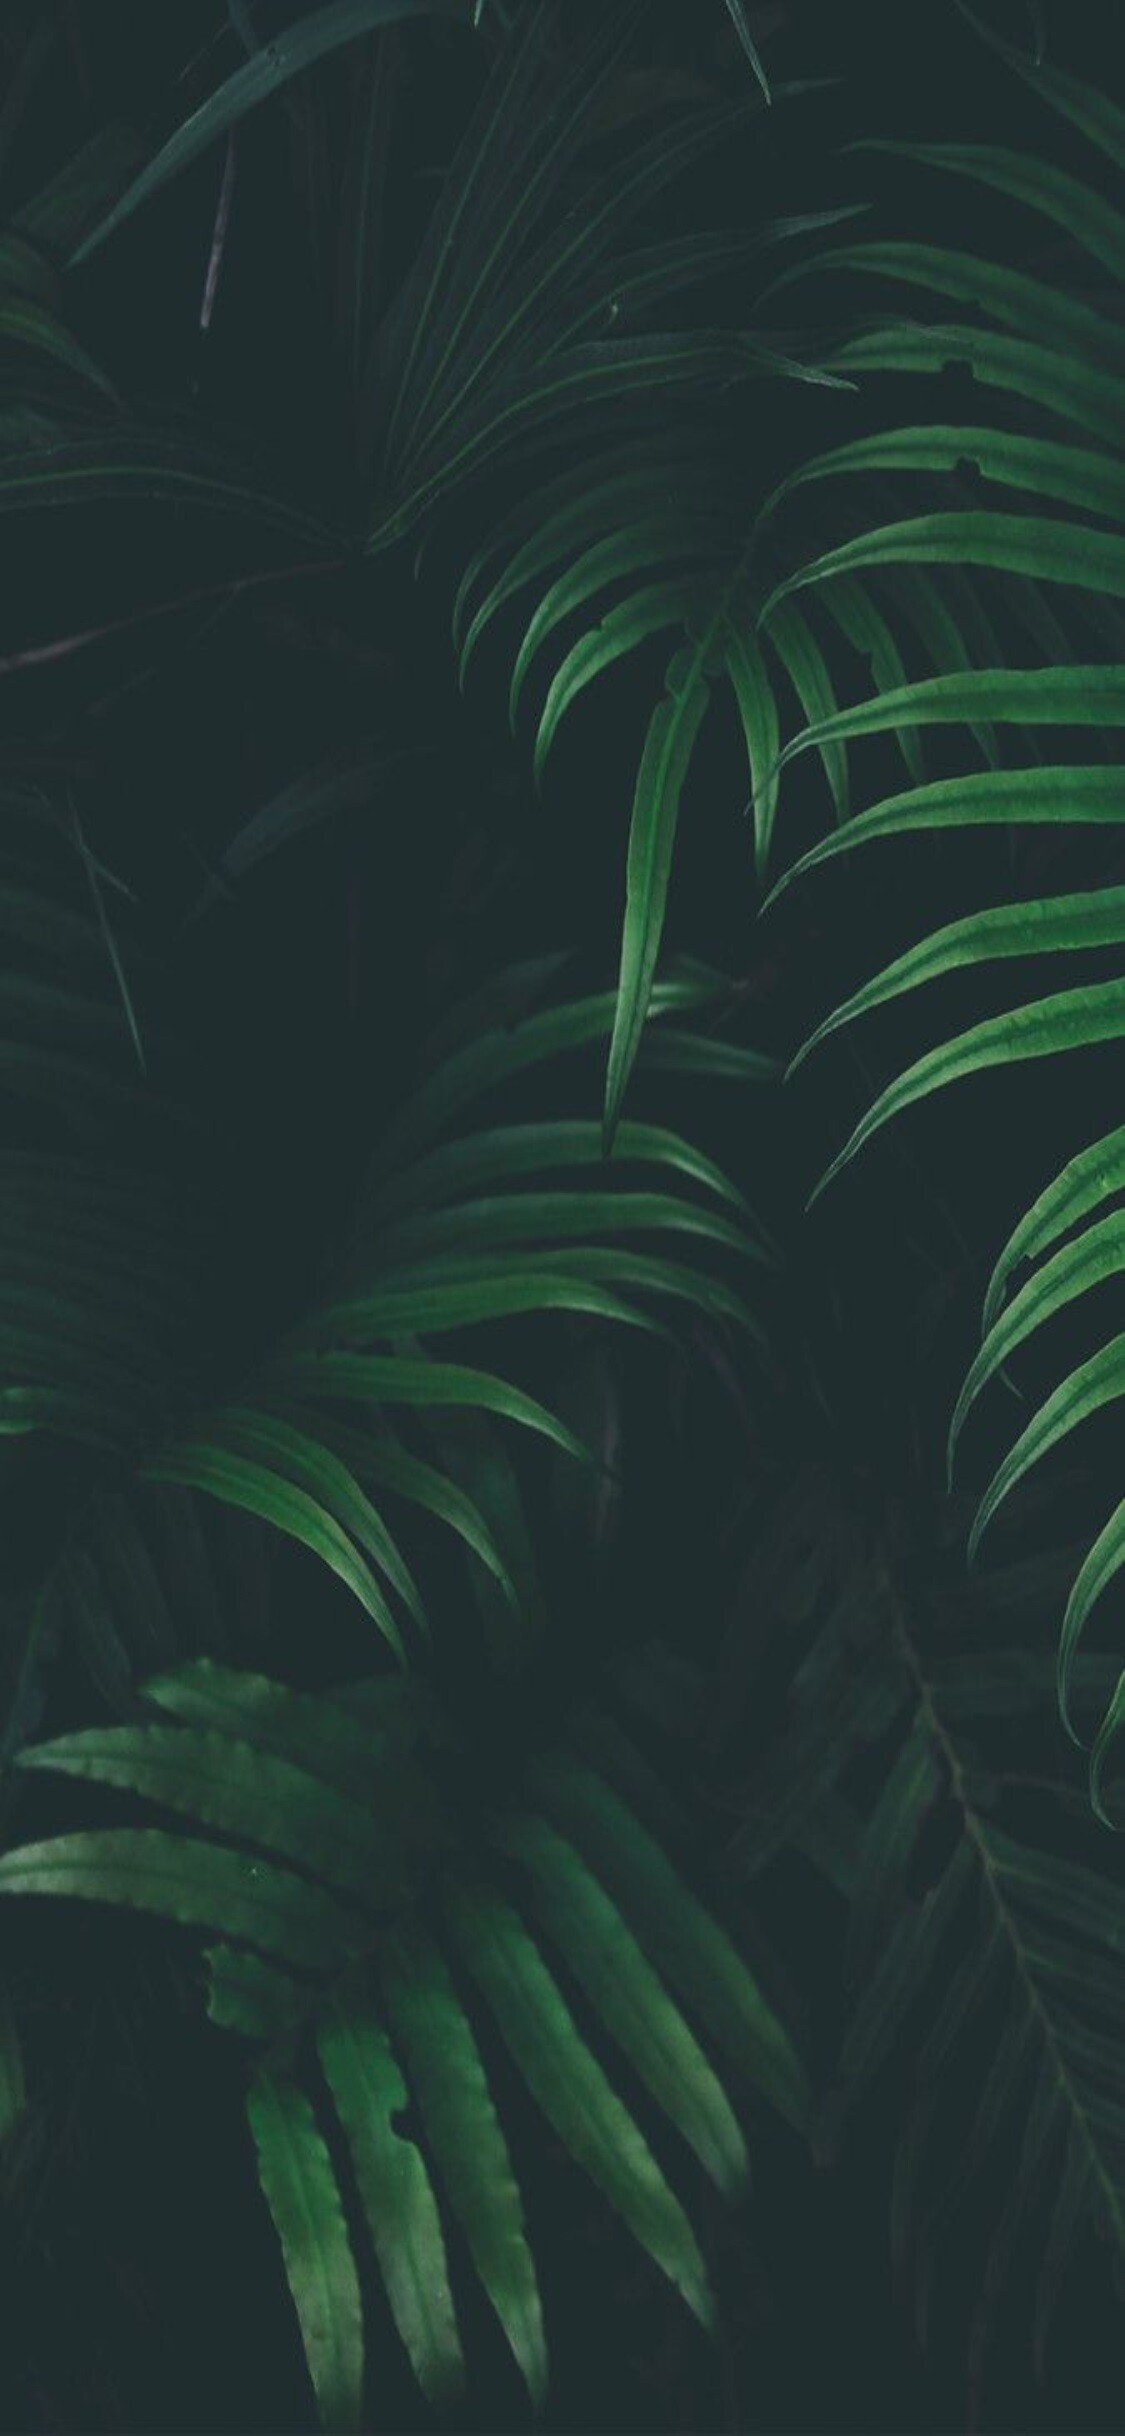 iPhone X wallpaper, Tropical jungle, Desktop collection, Stunning images, 1130x2440 HD Phone